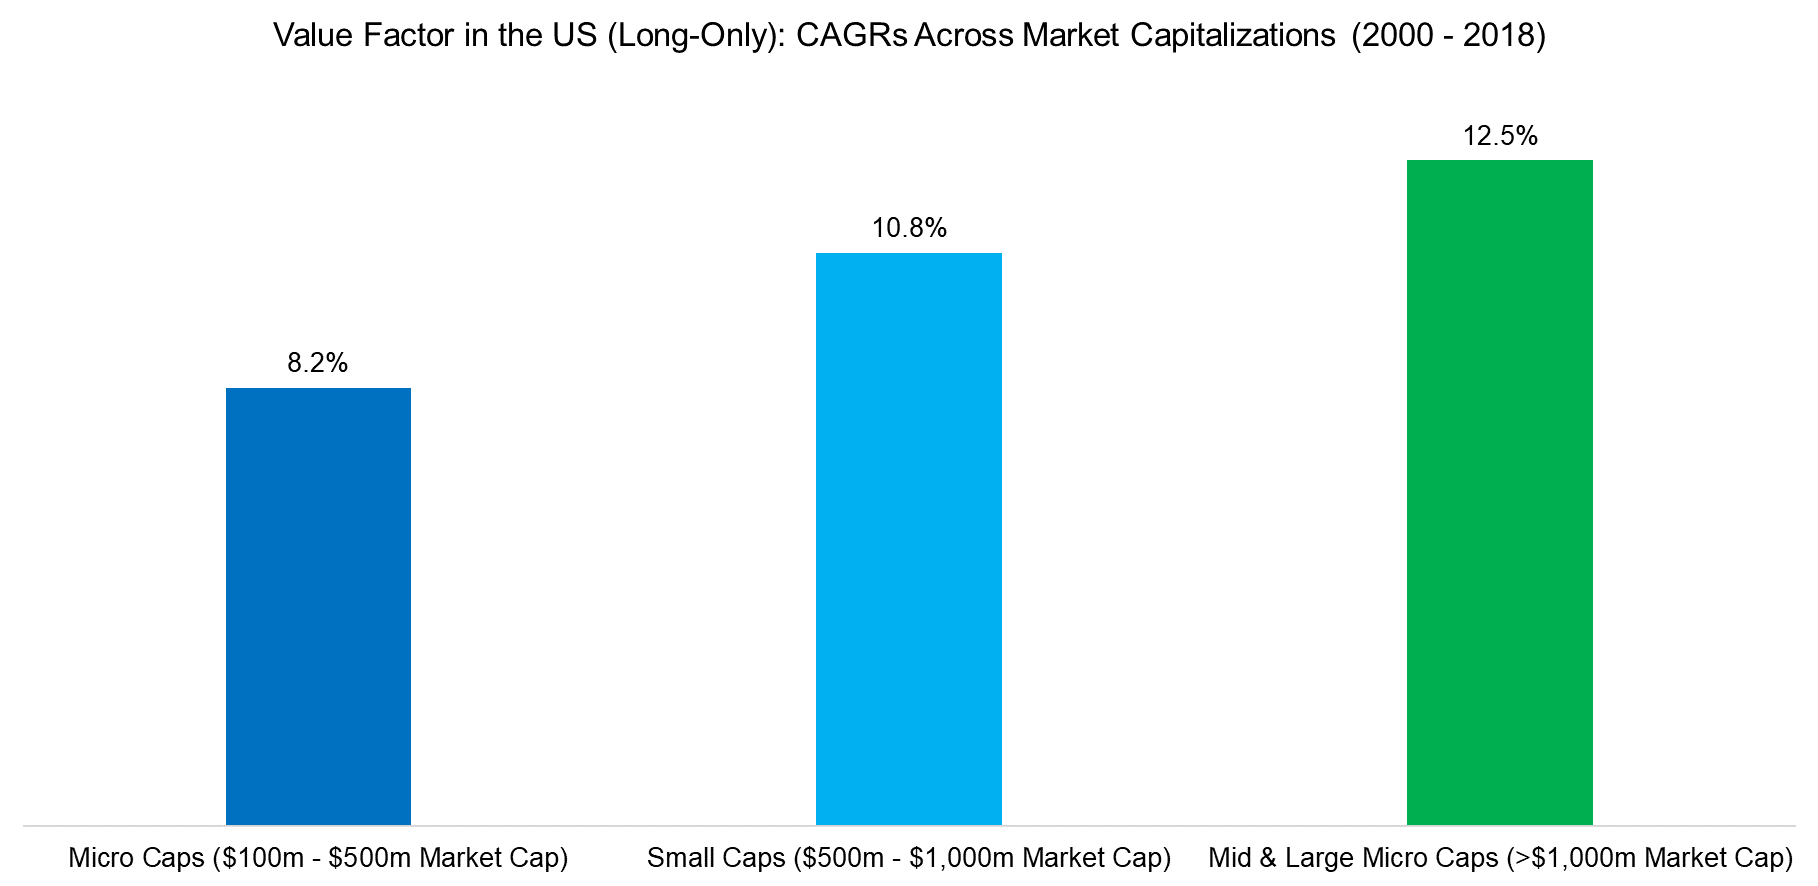 Value Factor in the US (Long-Only) CAGRs Across Market Capitalizations (2000 - 2018)